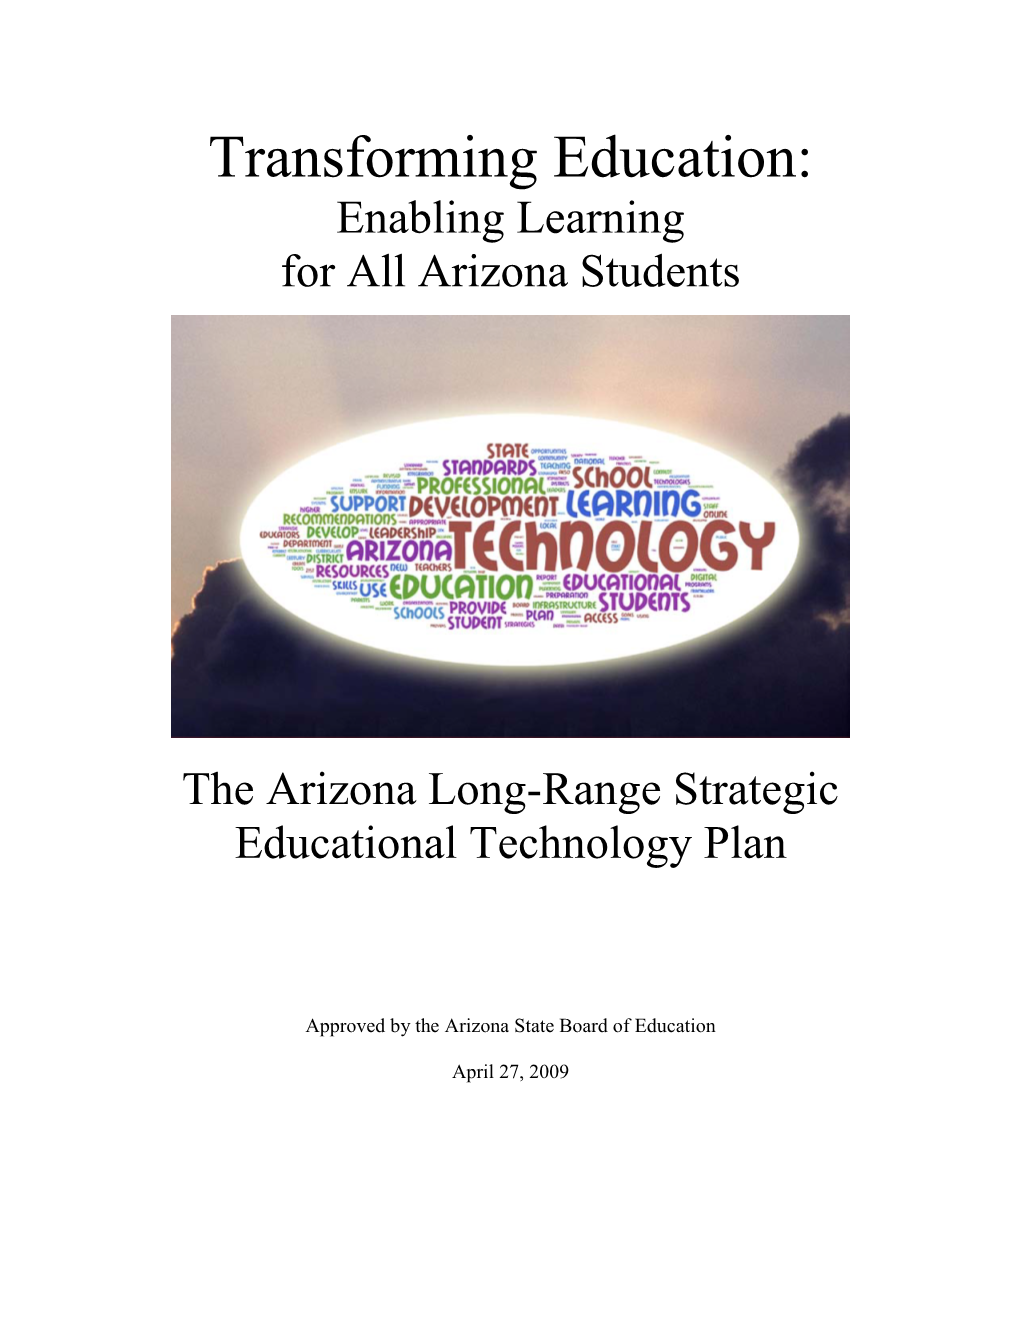 Transforming Education: Enabling Learning for All Arizona Students